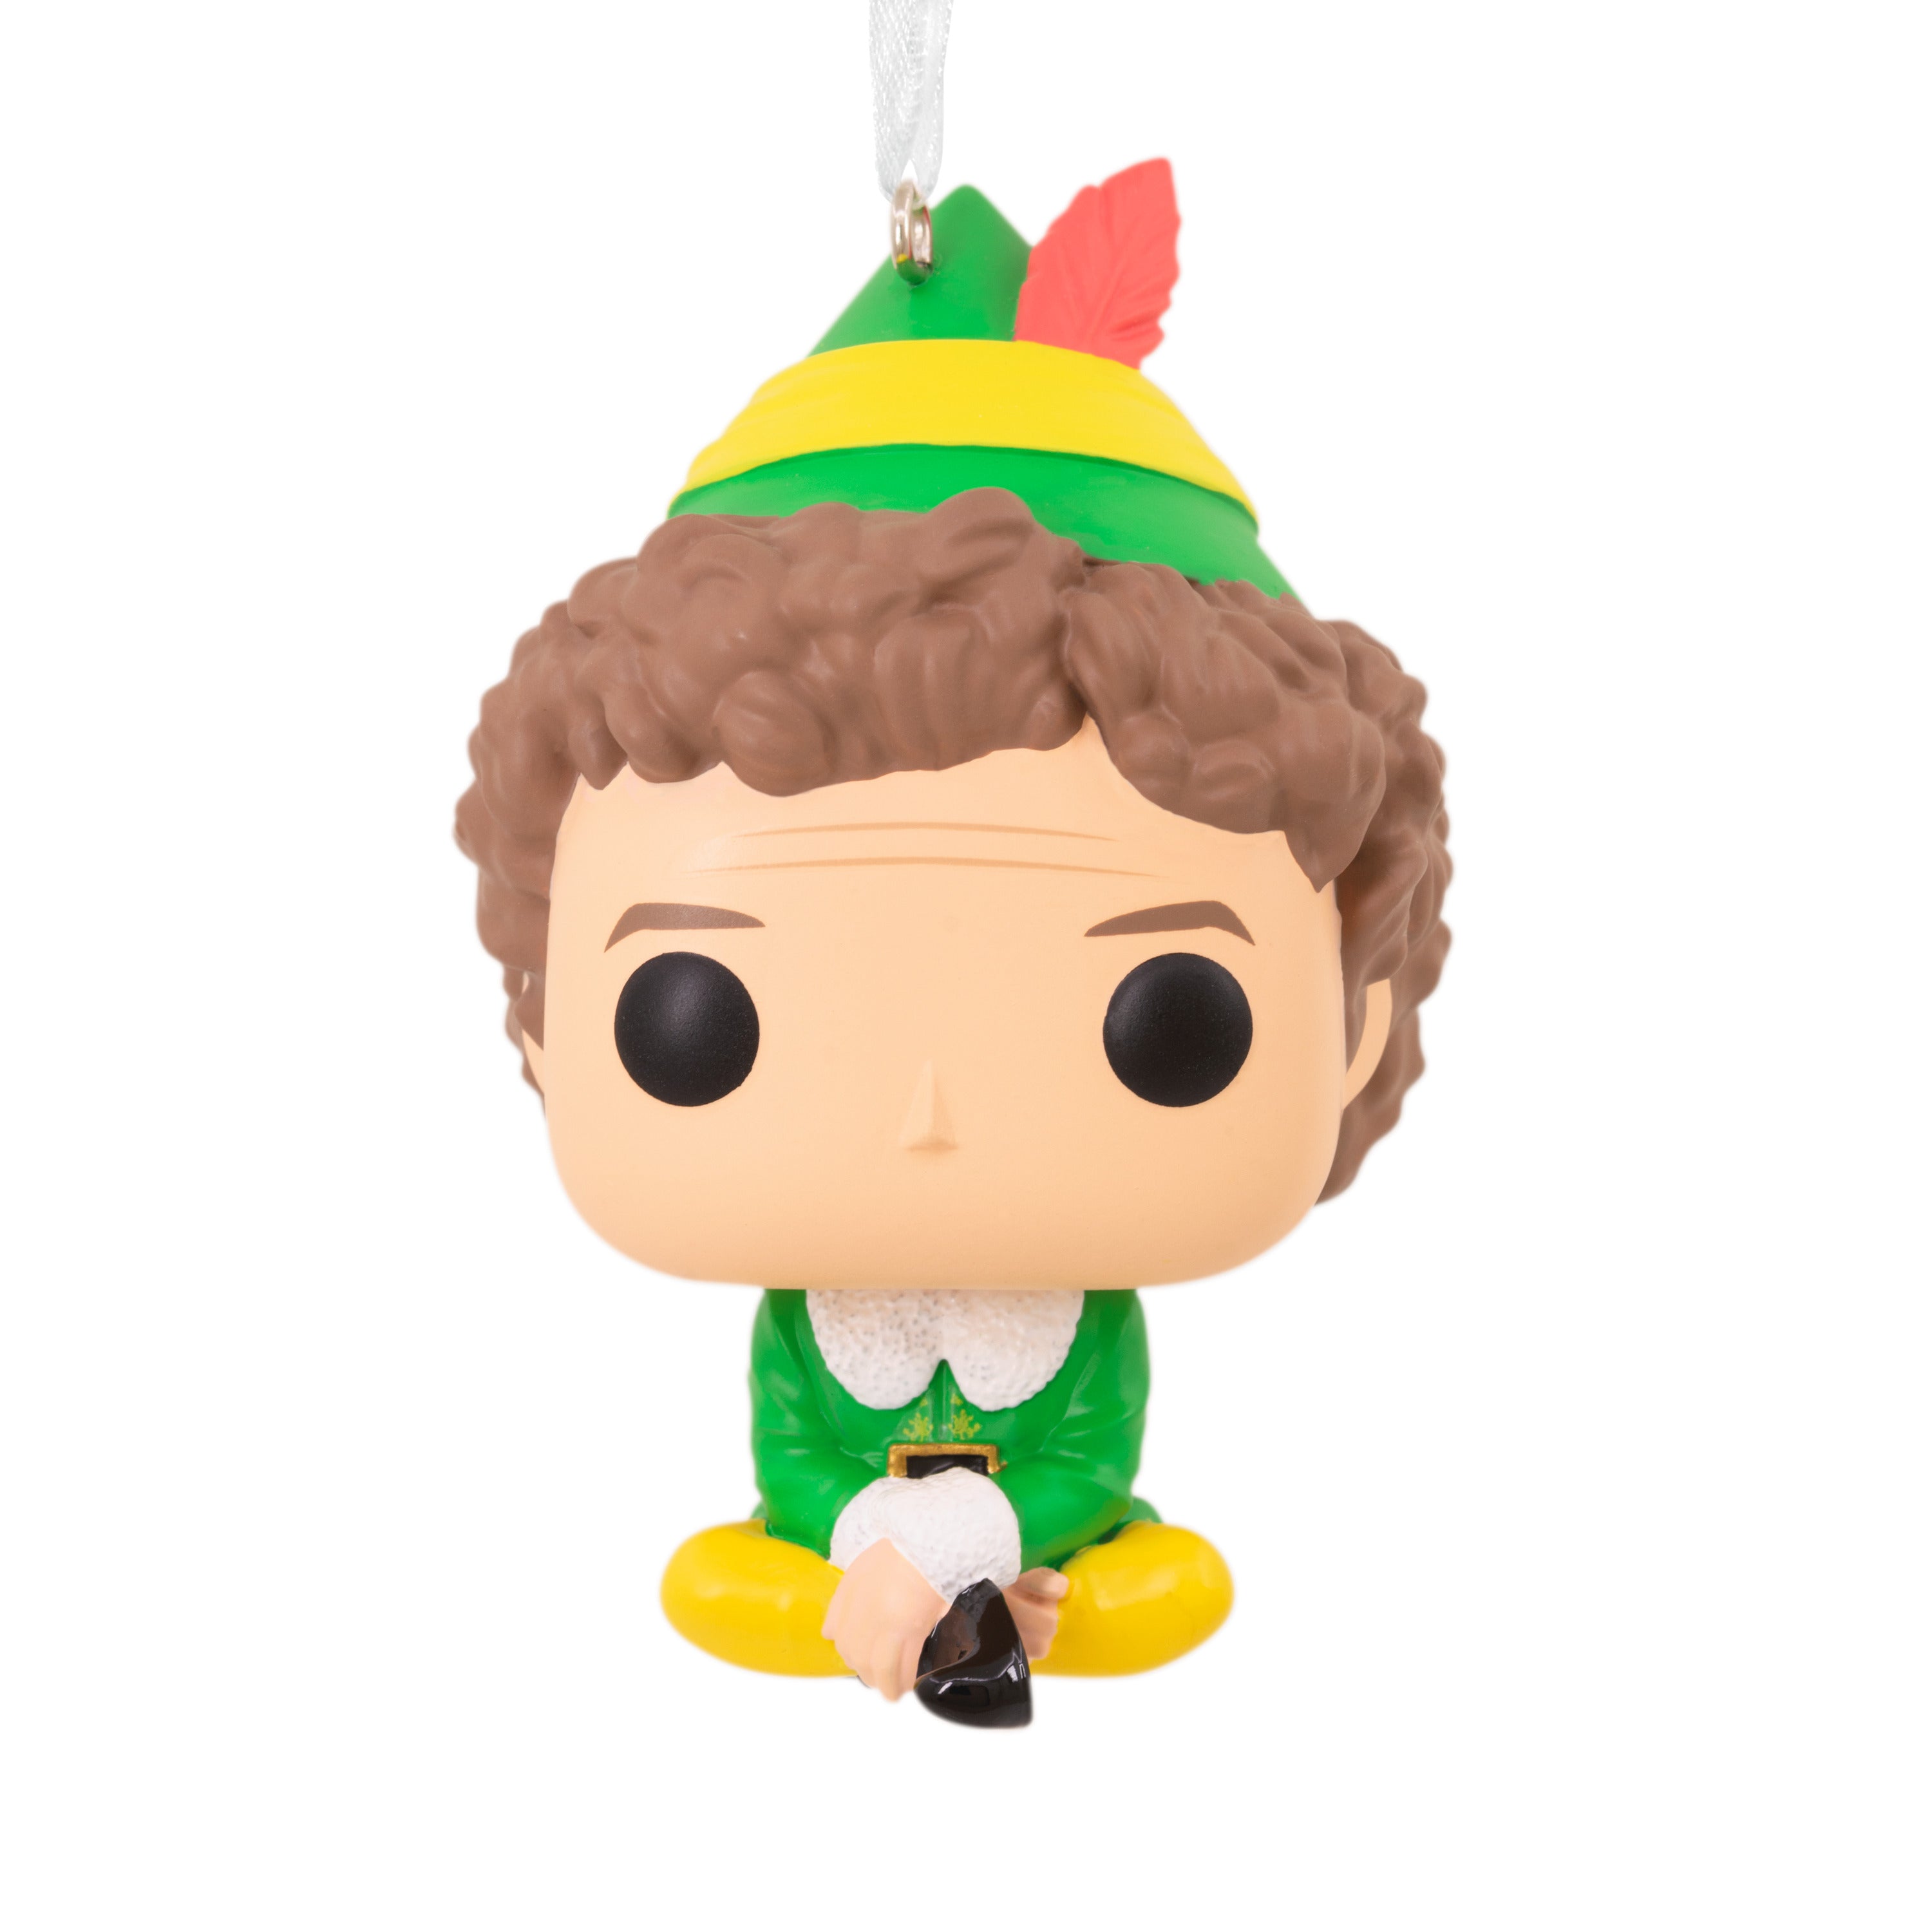 Collectable Funko Pop Christmas Ornament - Buddy the Elf Design